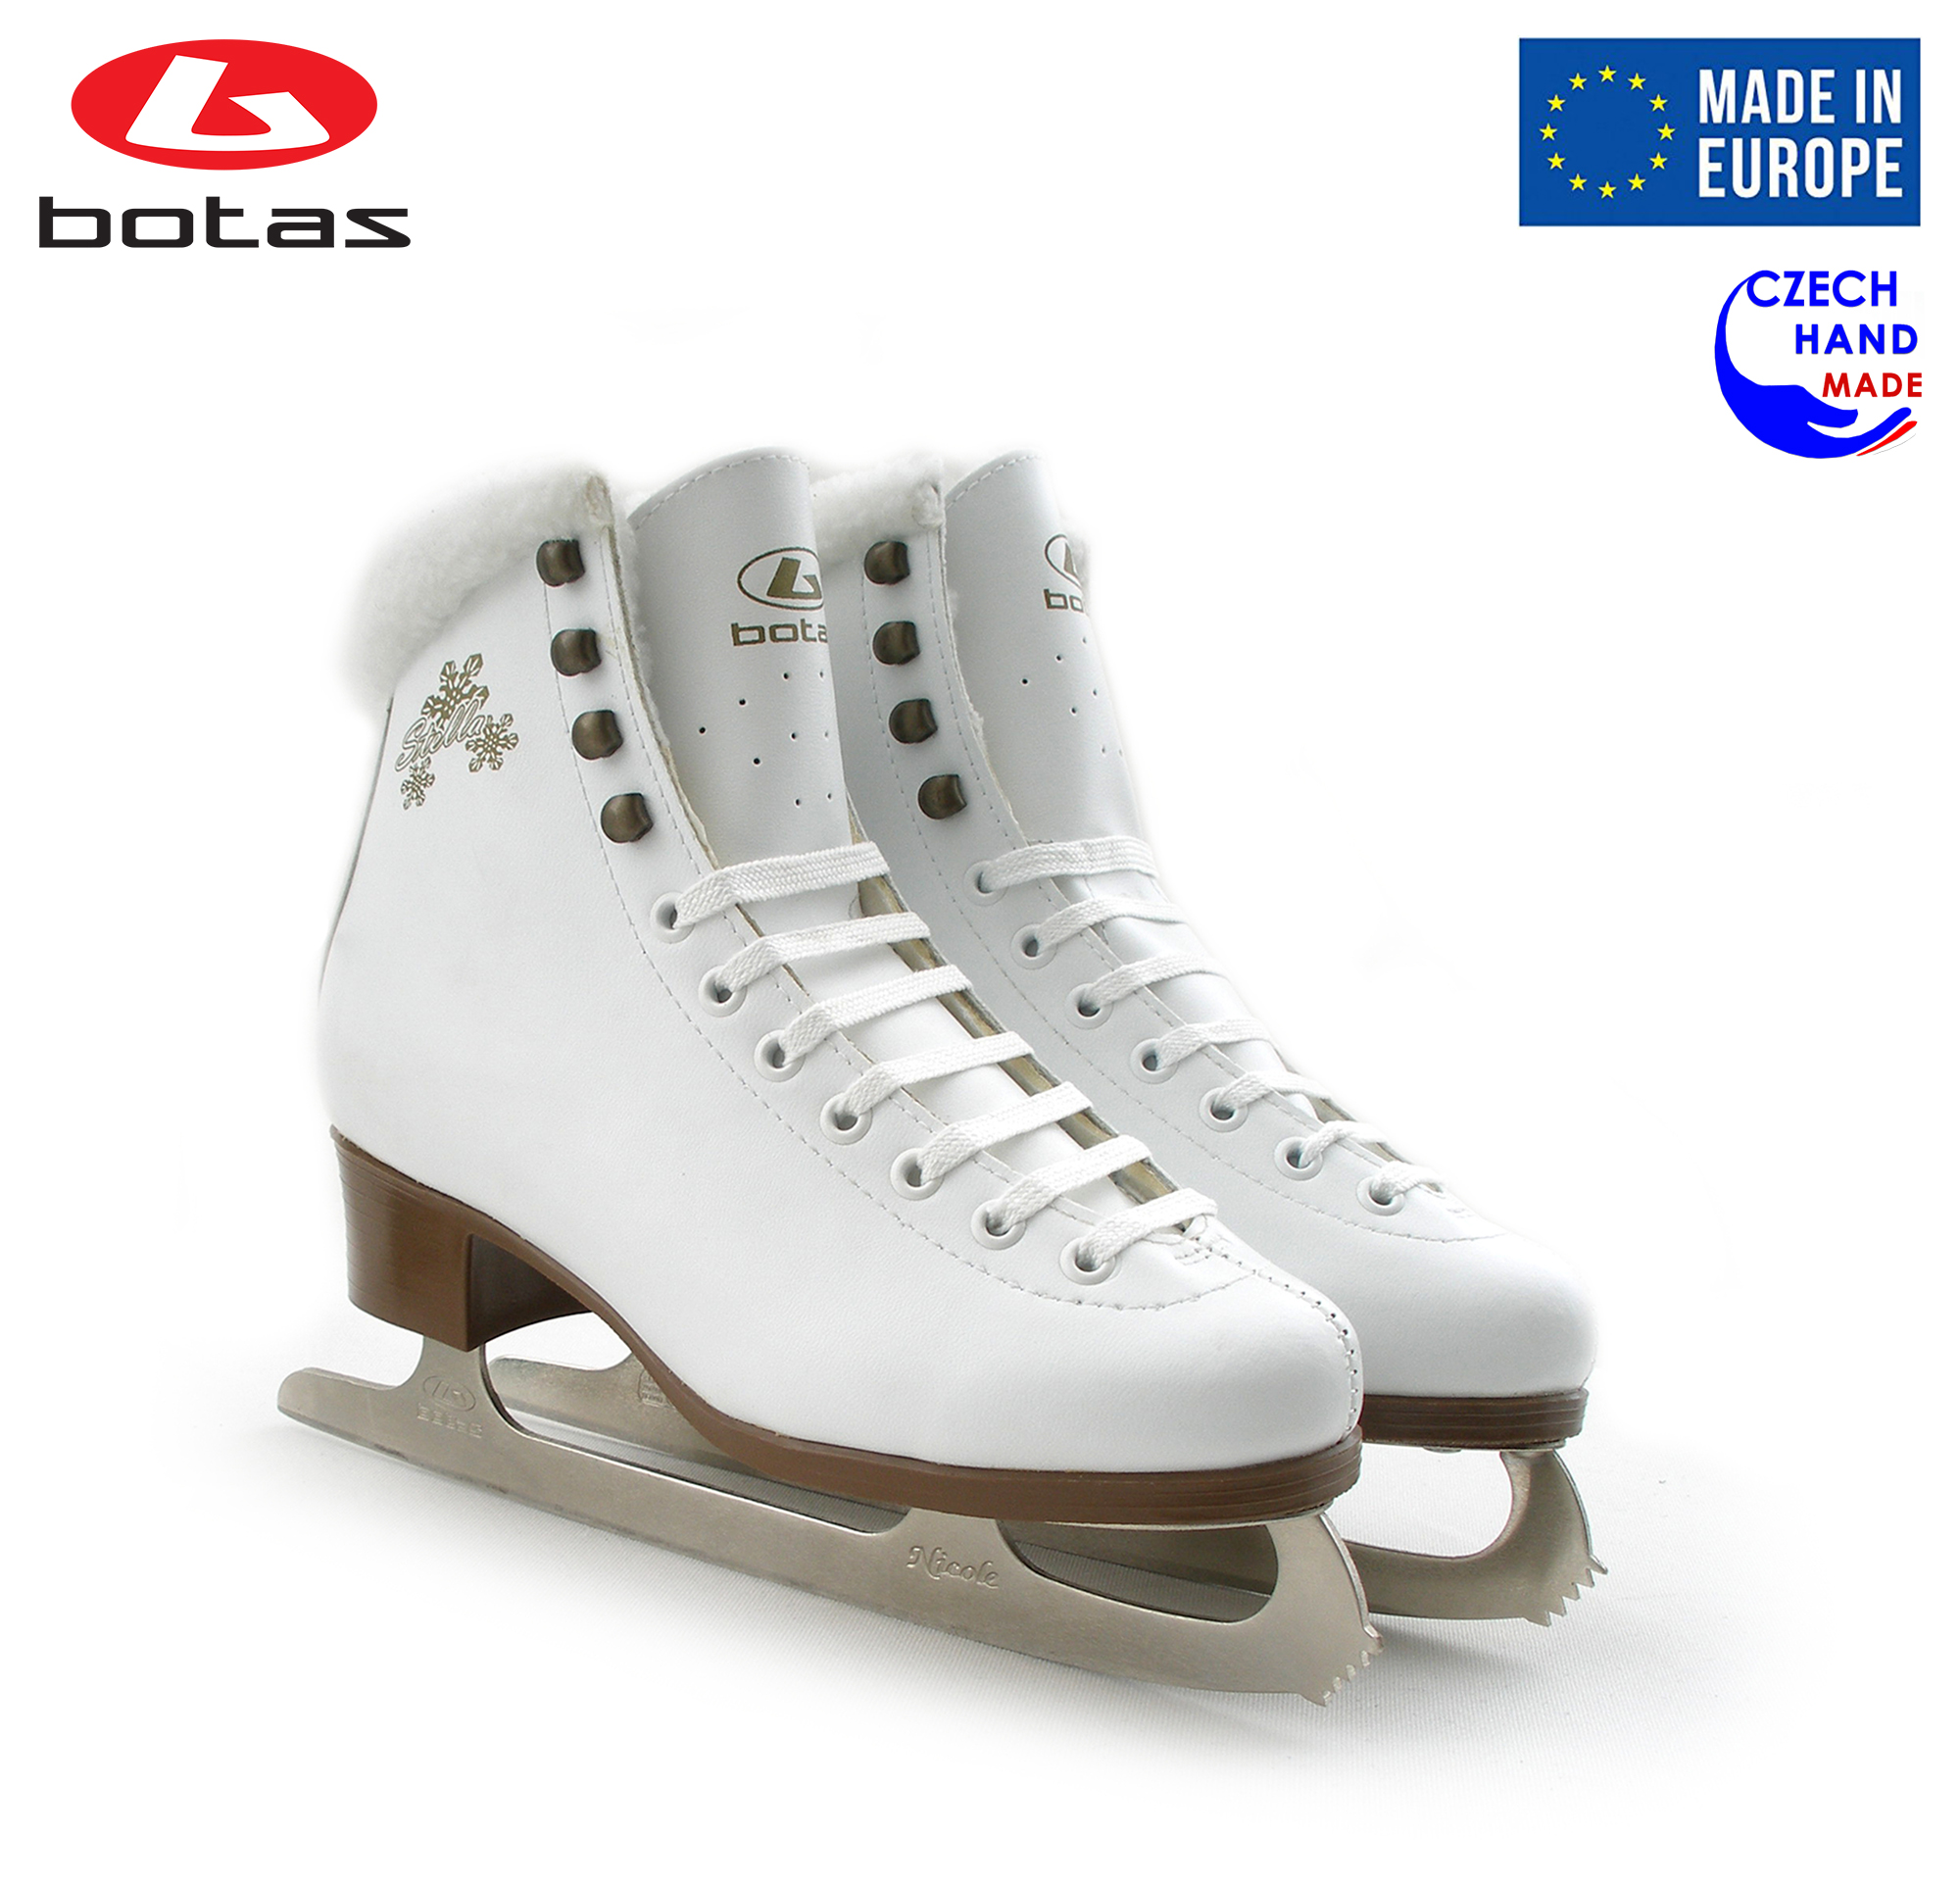 BOTAS - model: STELLA / Made in Europe (Czech Republic) / Innovated Elegant Figure Ice Skates for Girls, Kids / with Plush Collar / NICOLE blades / Color: White, Size: Kids 11 - image 4 of 6